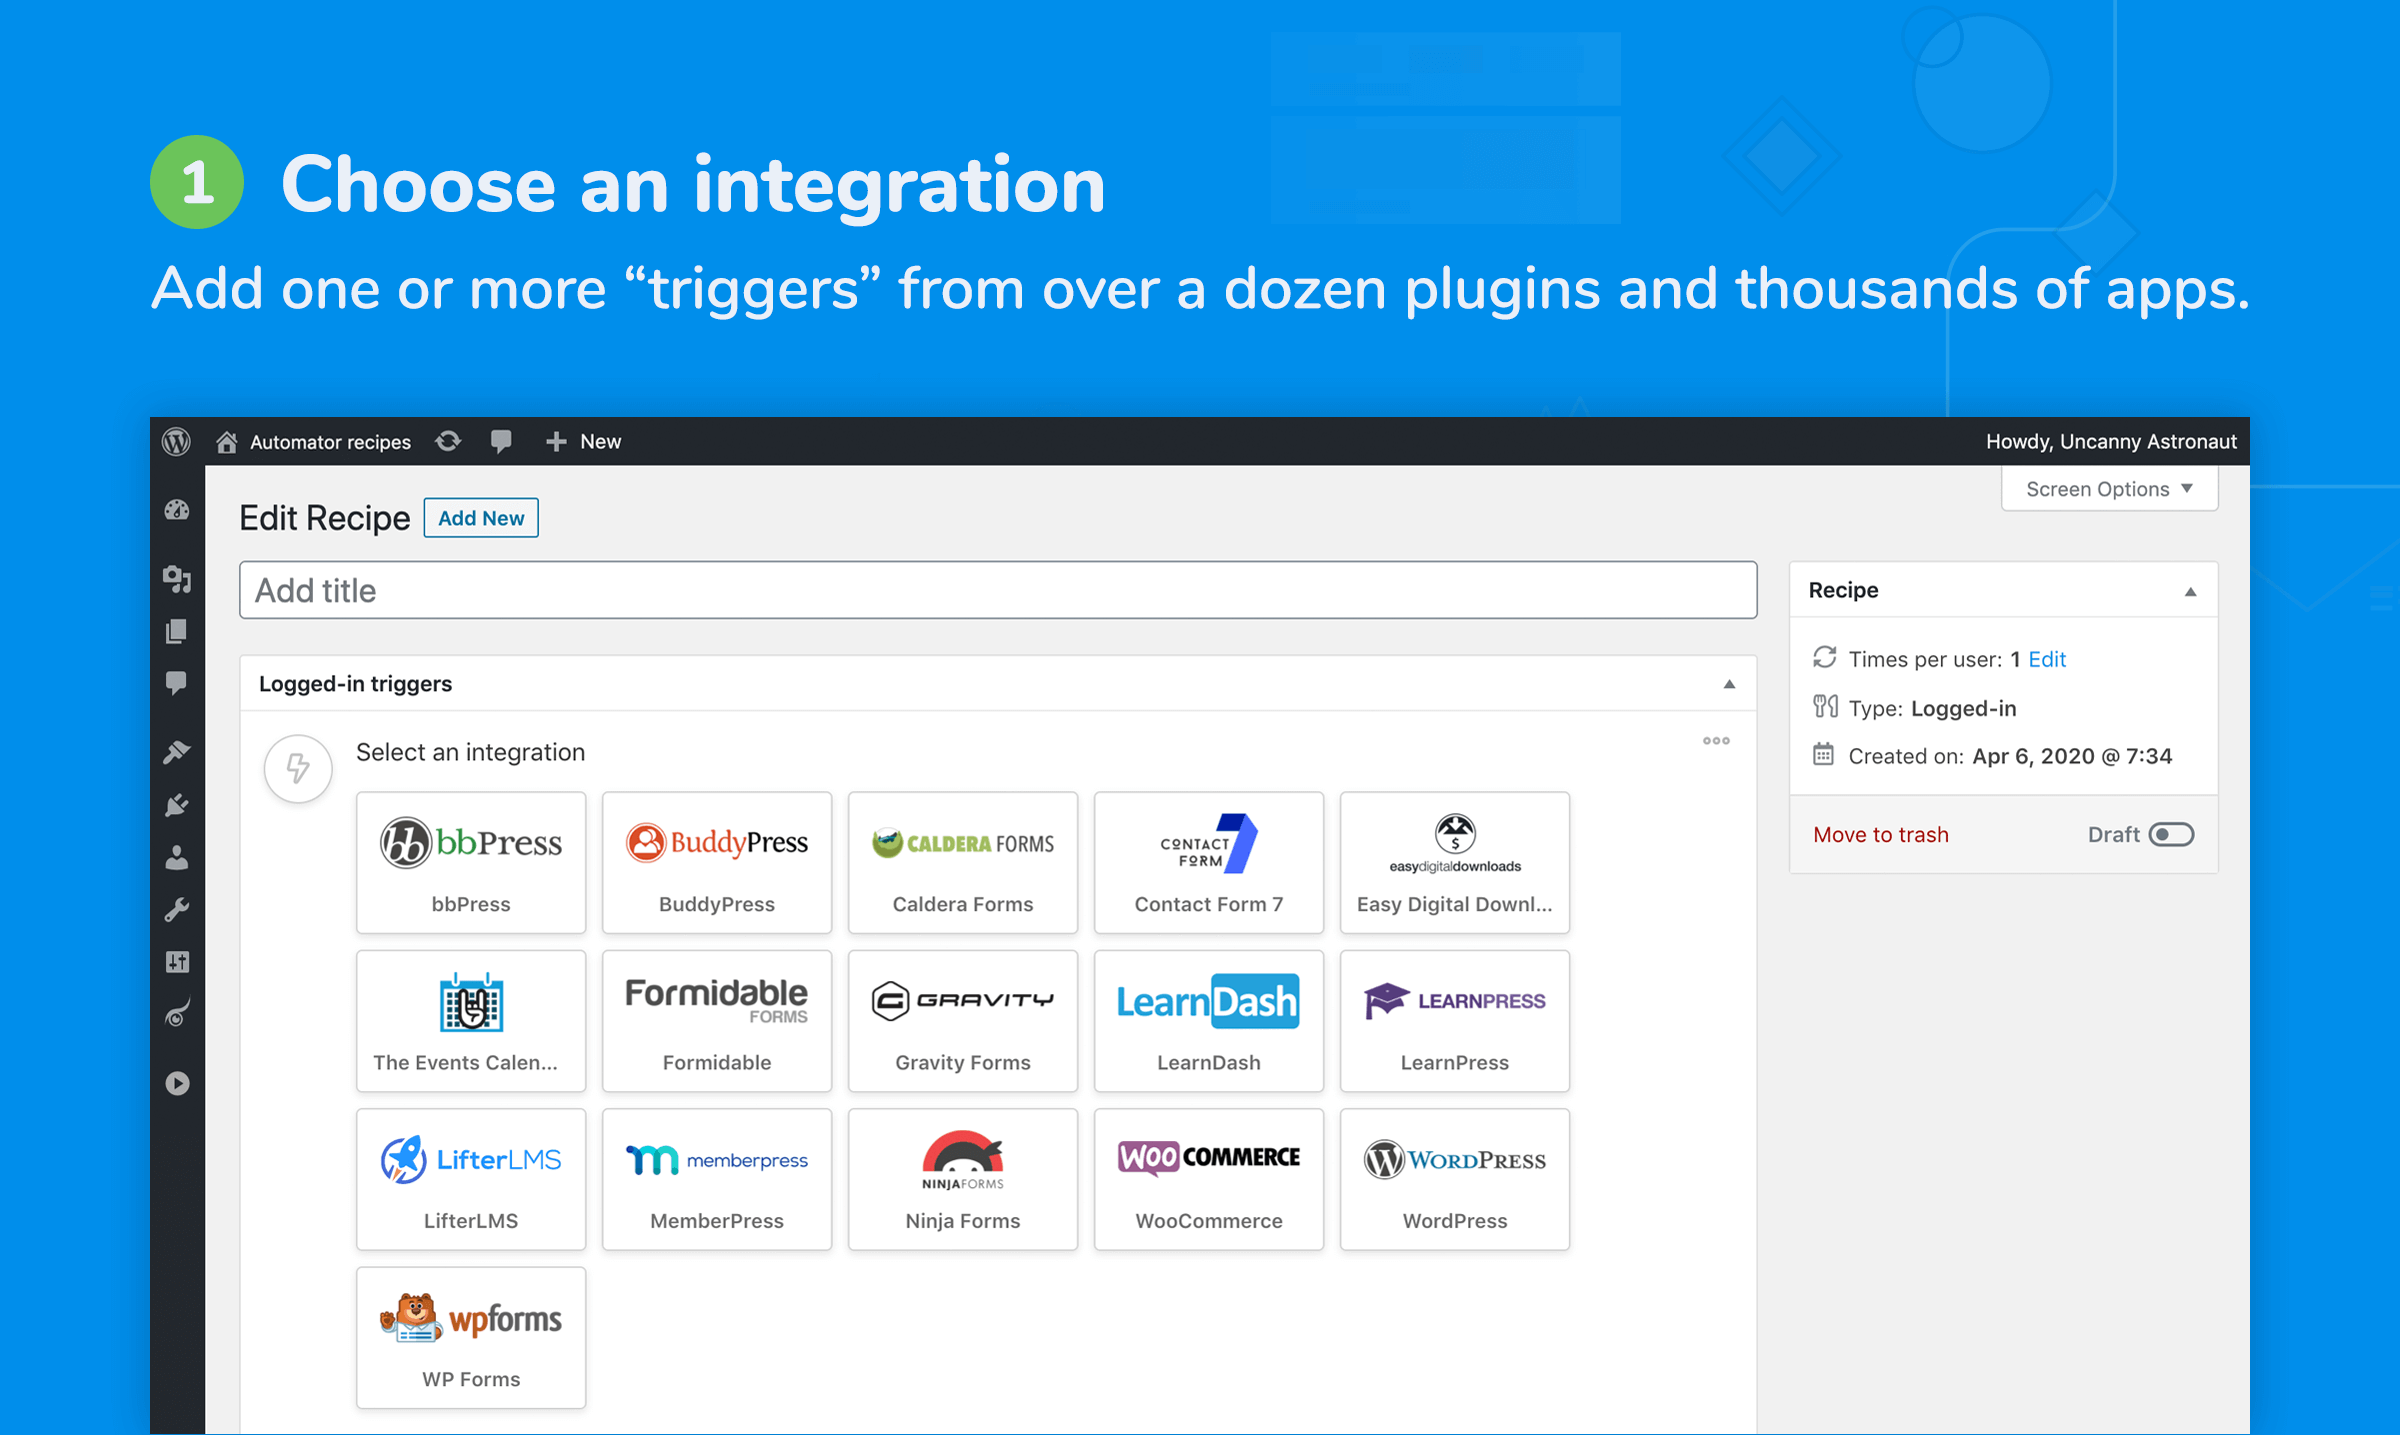 Add one or more triggers from dozens of plugins and thousands of apps